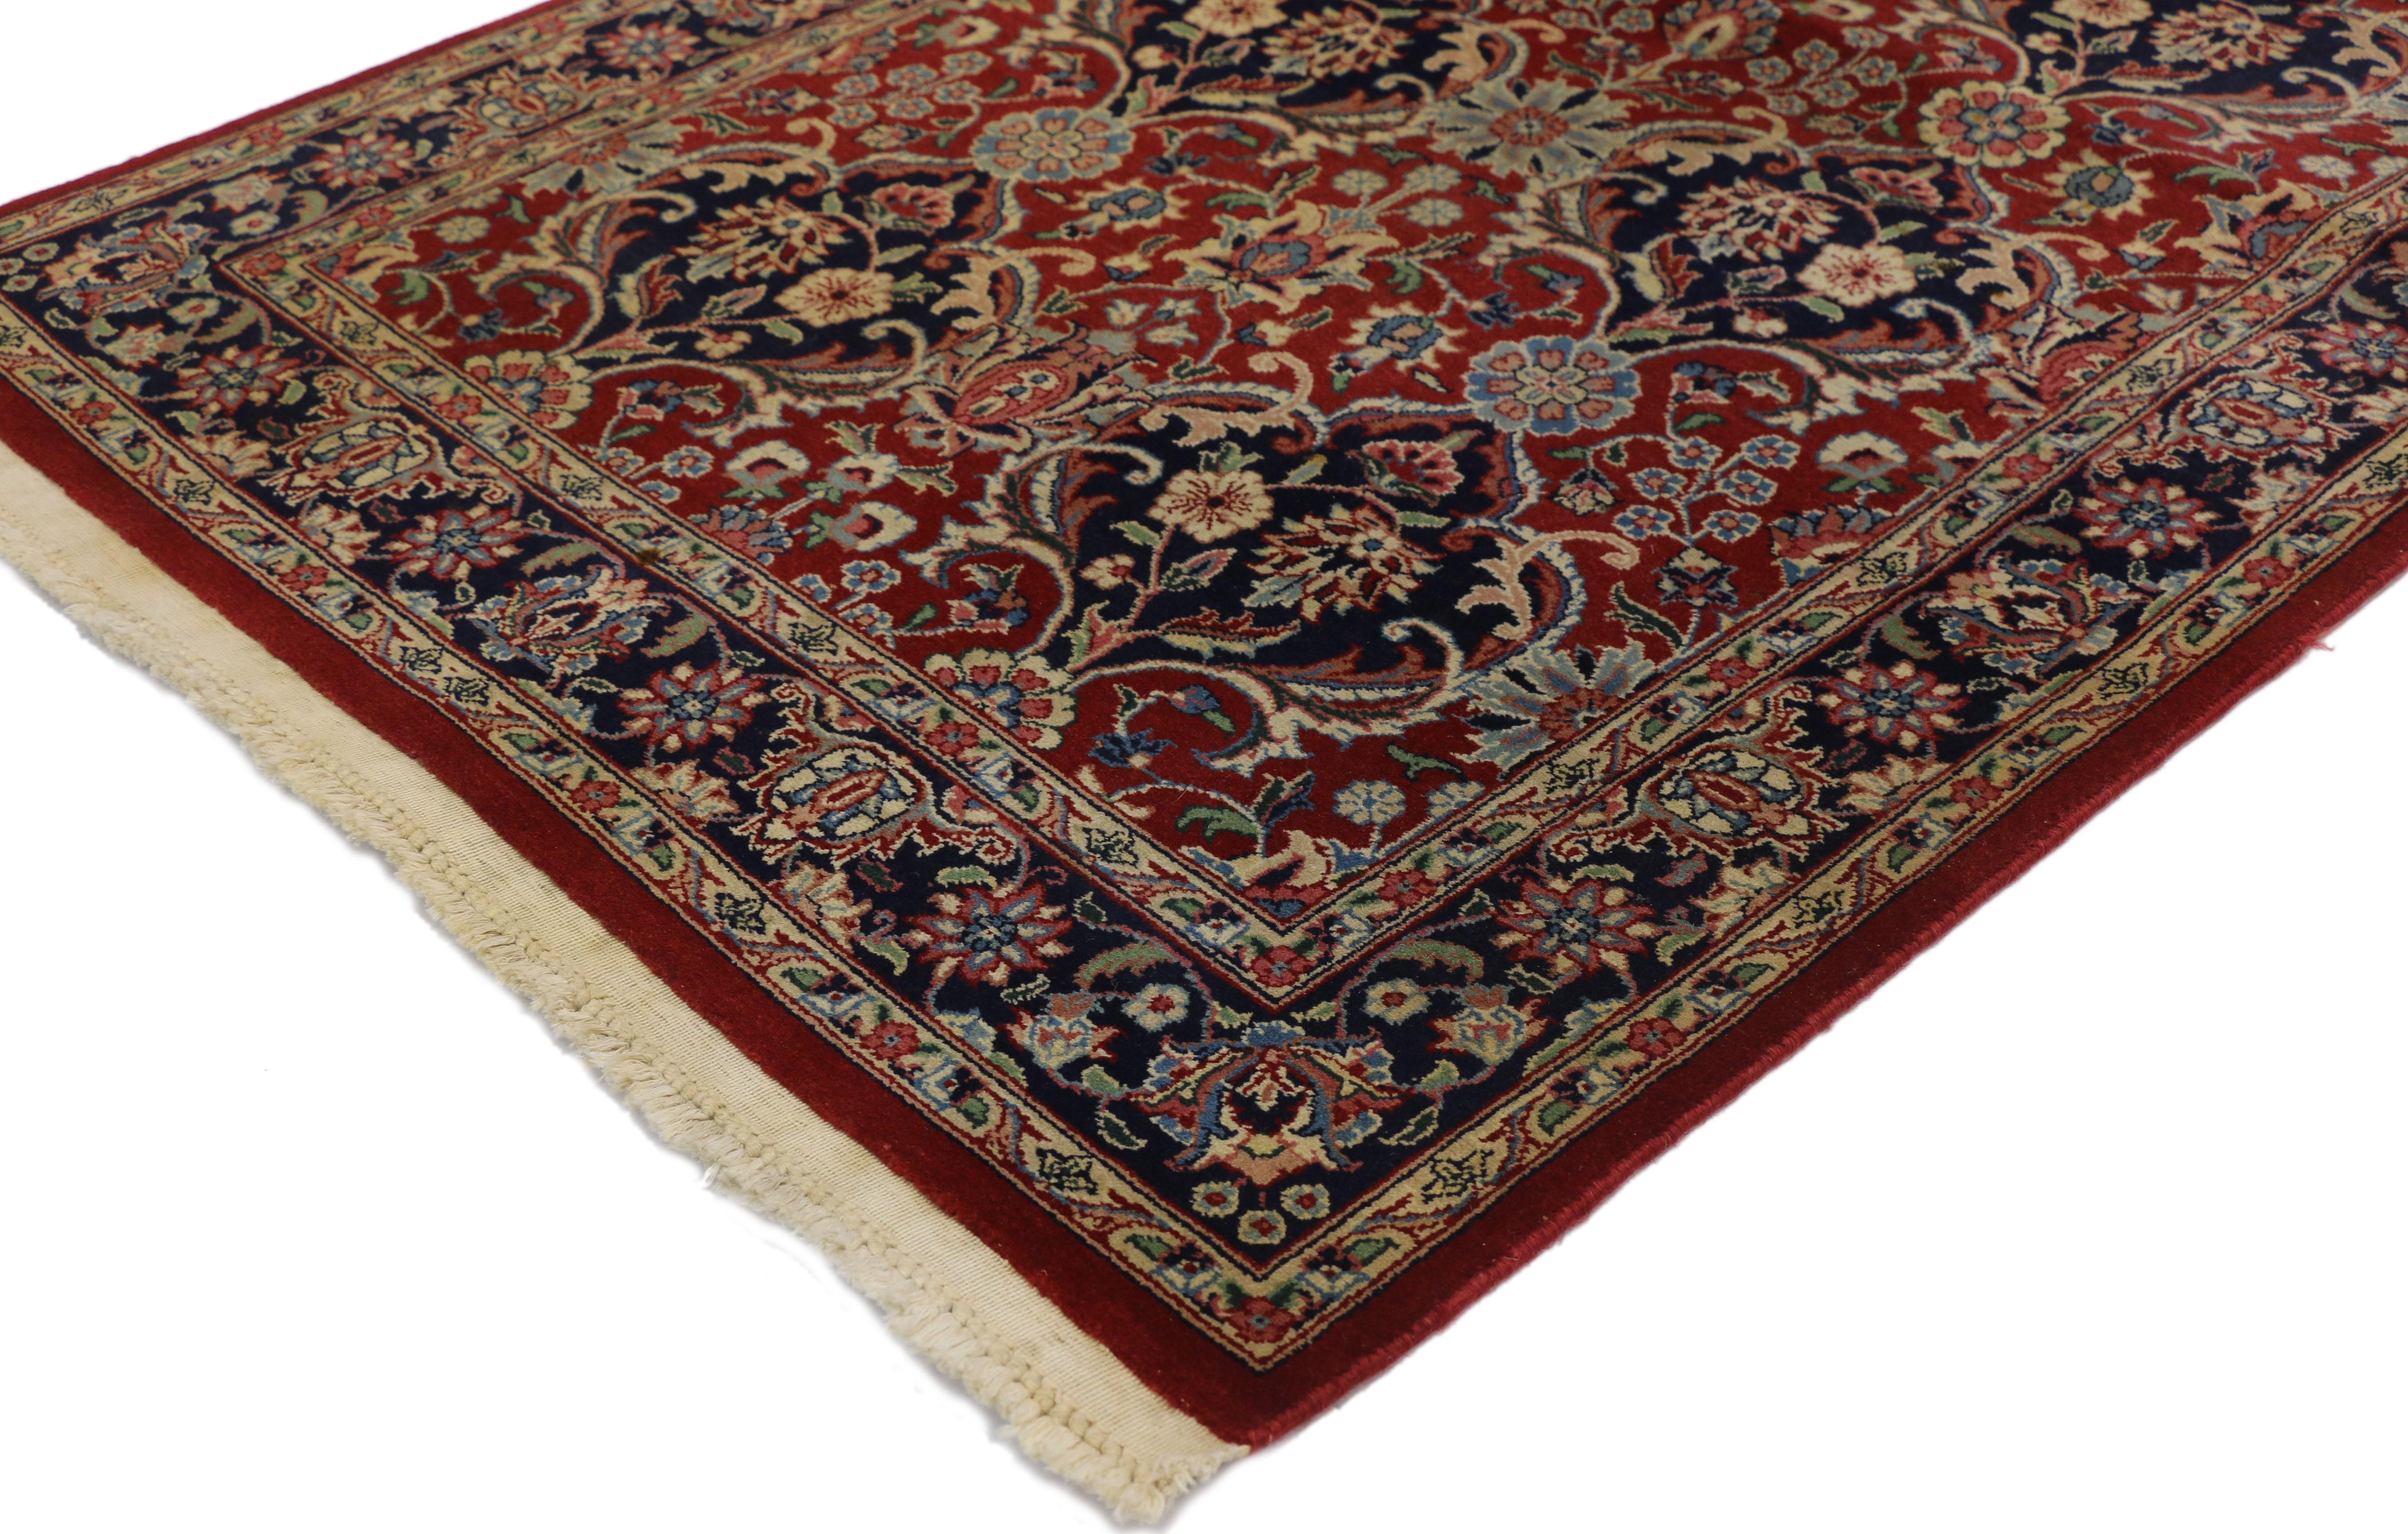 74301 Vintage Pakistani Rug with Floral Bouquets and Persian Design. Eight floral bouquets with navy blue halos grace a bright red field in this tastefully detailed Pakistani rug. Within the all-over pattern round florets appear at intervals and